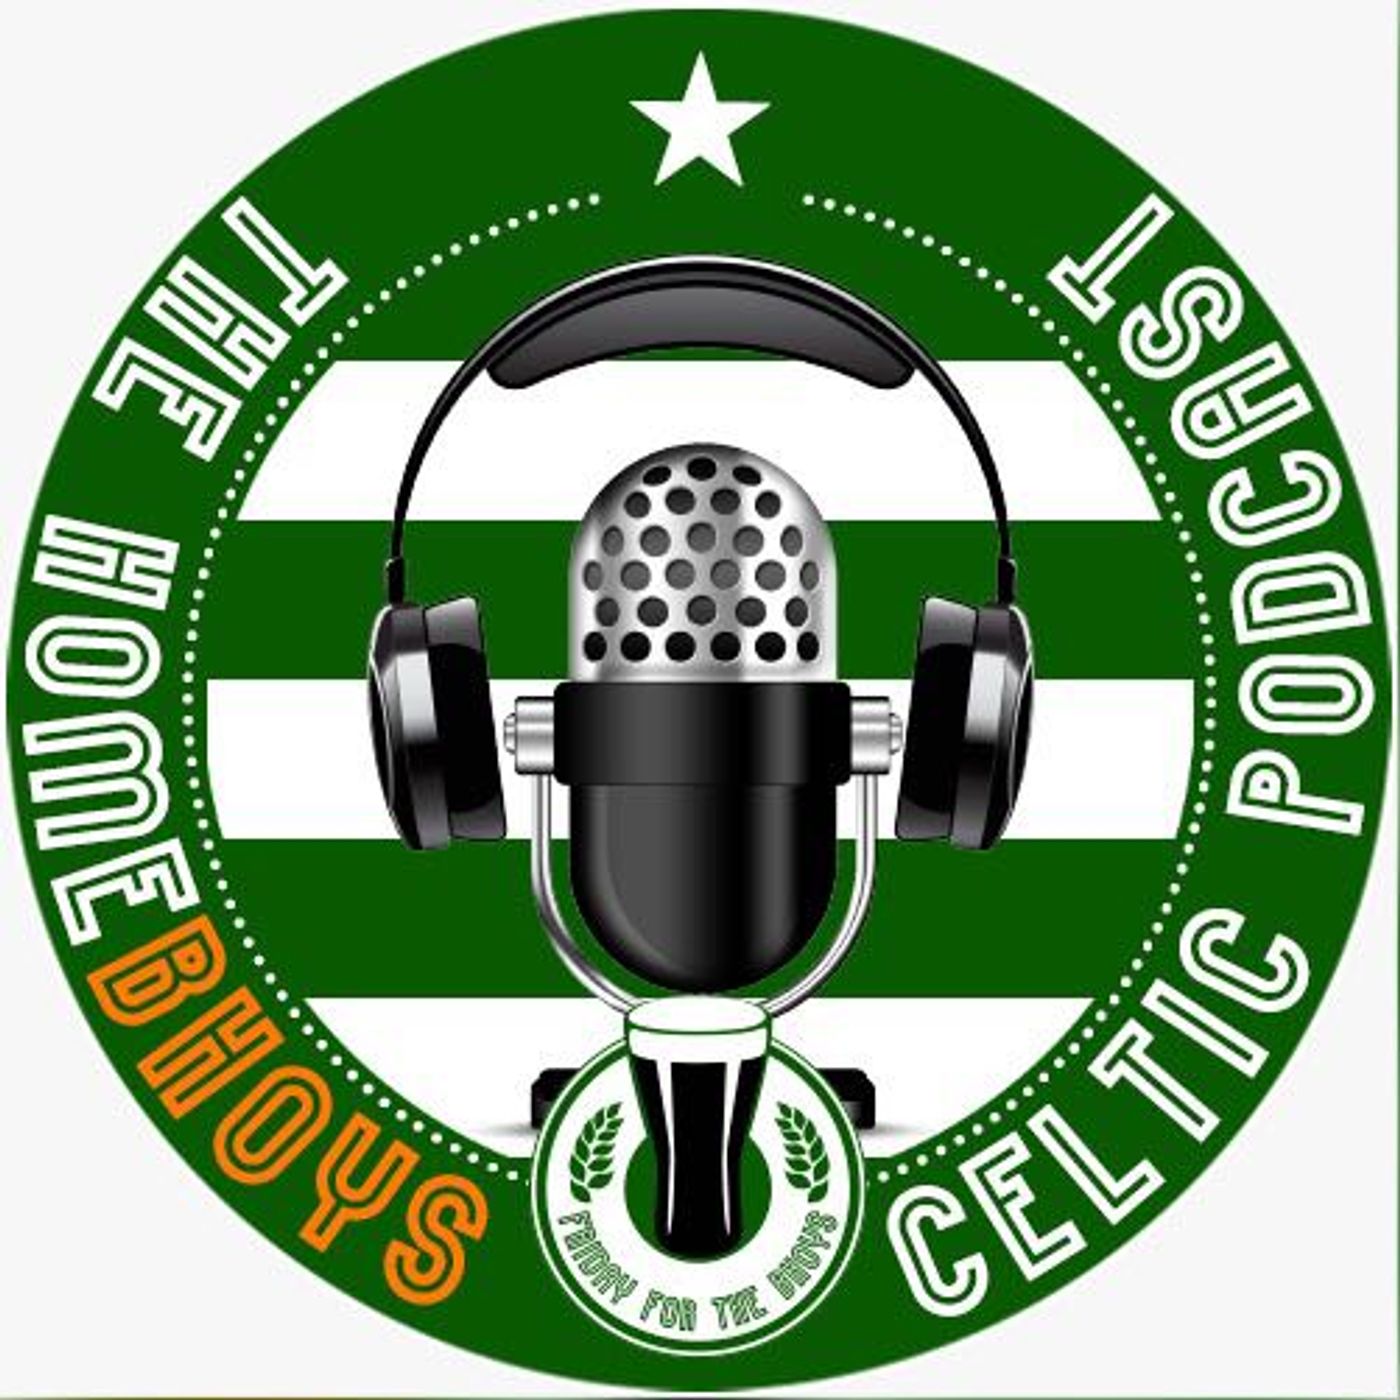 HomeBhoys #398 - Almost There!